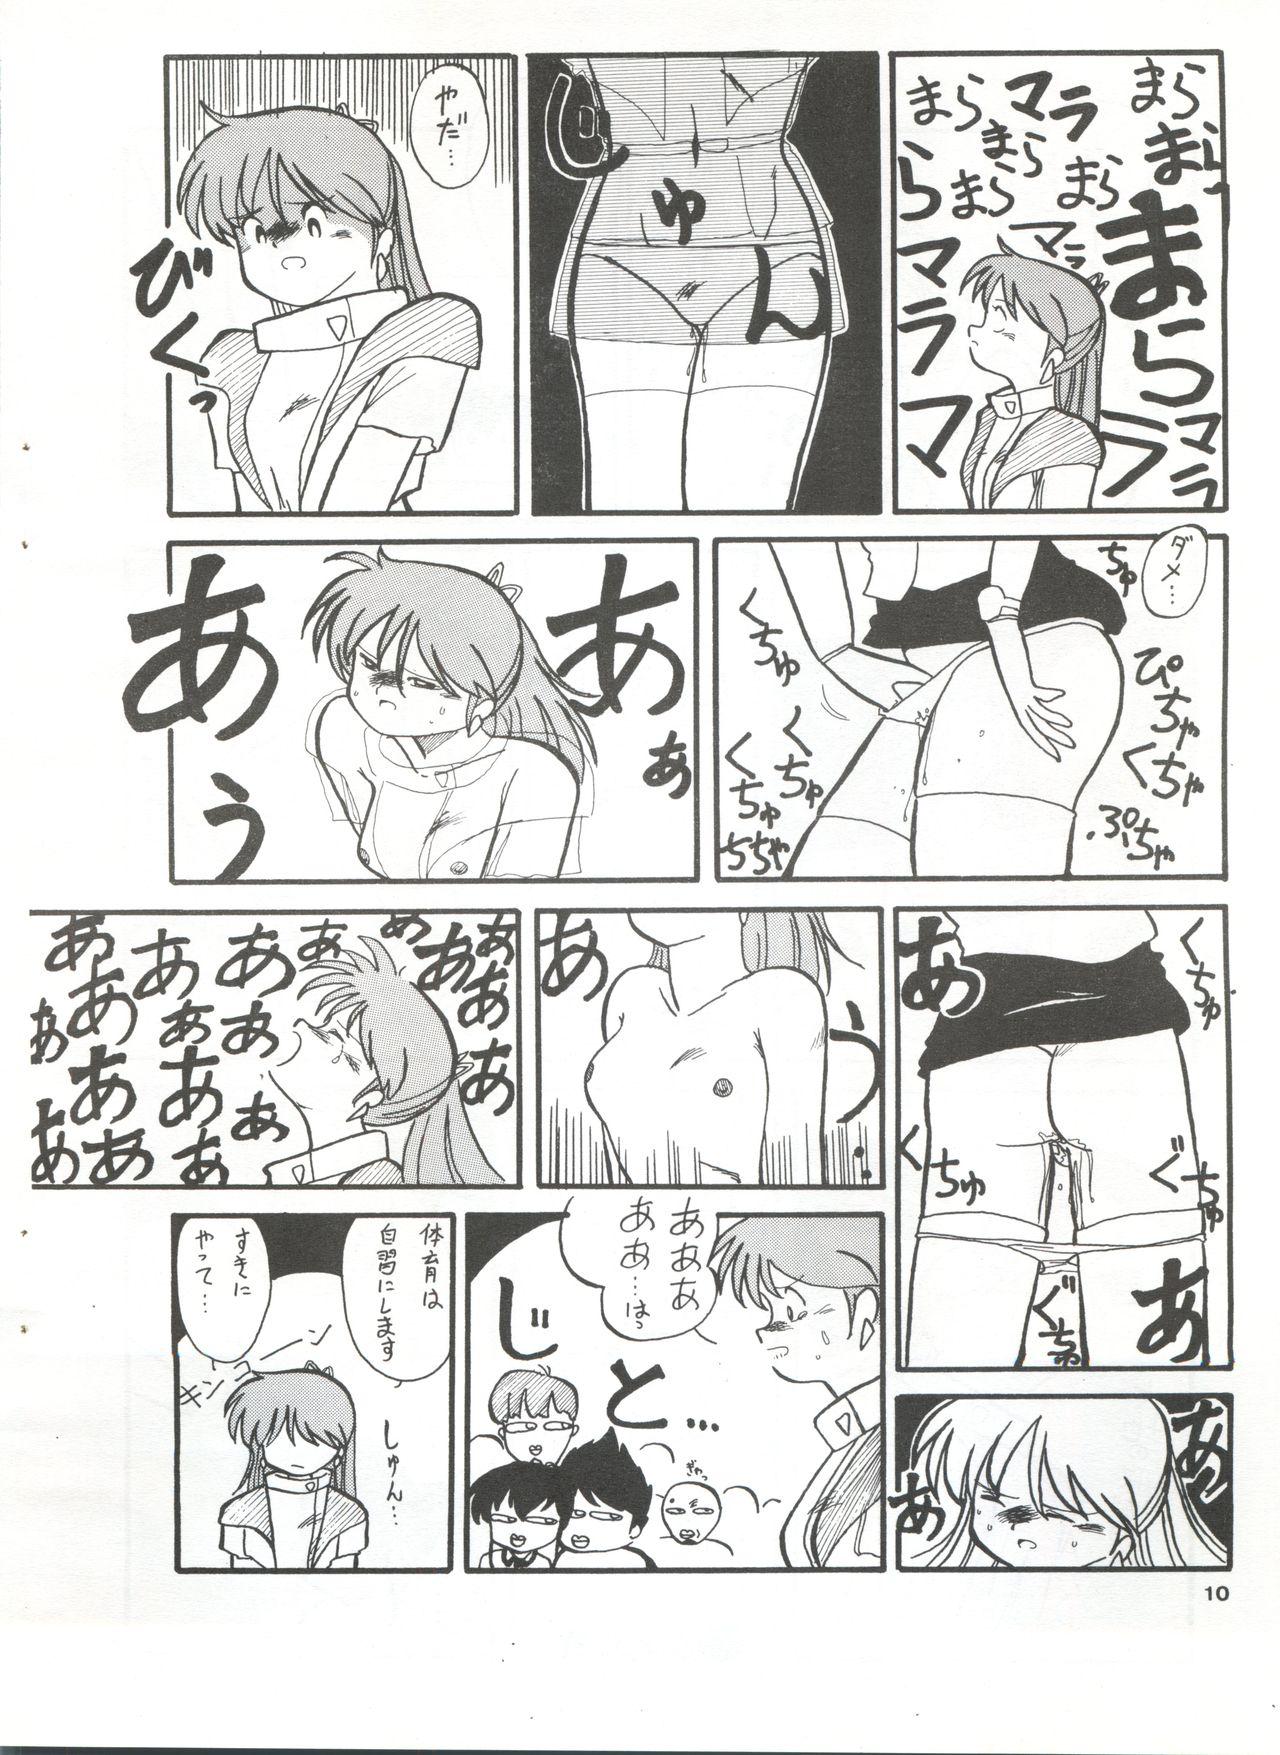 Spycam YATTE! YATTE! Mission 1 - Dirty pair Sonic soldier borgman Gloryholes - Page 9